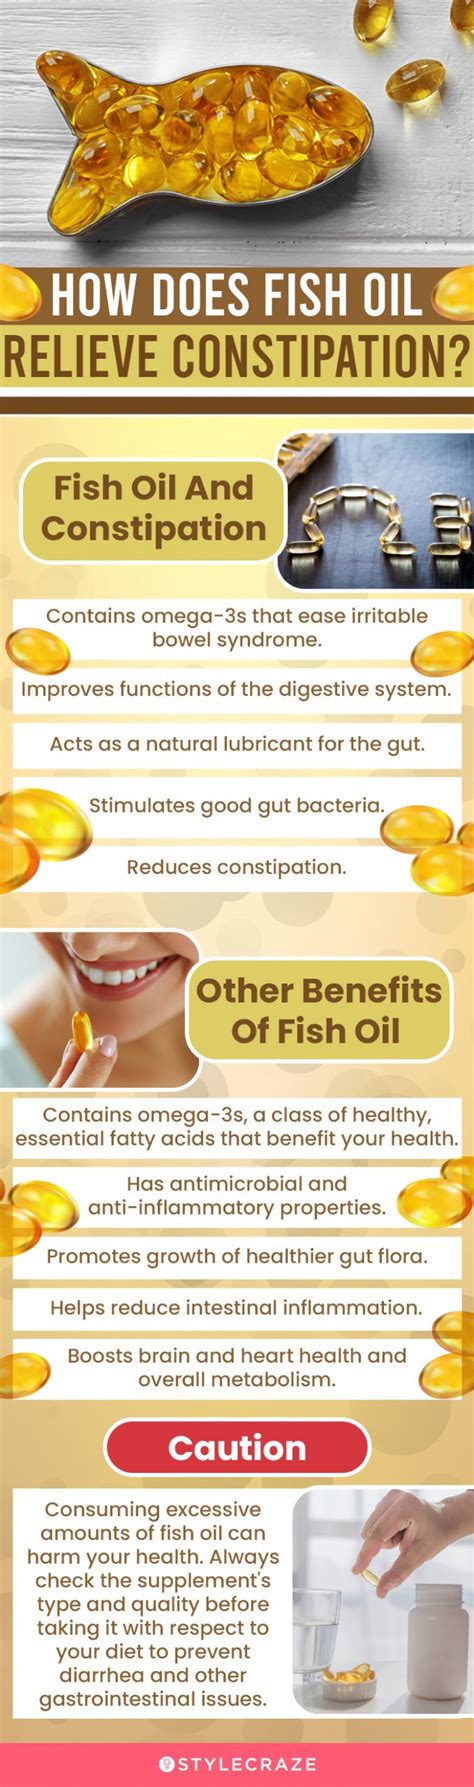 Can old fish oil make you sick?